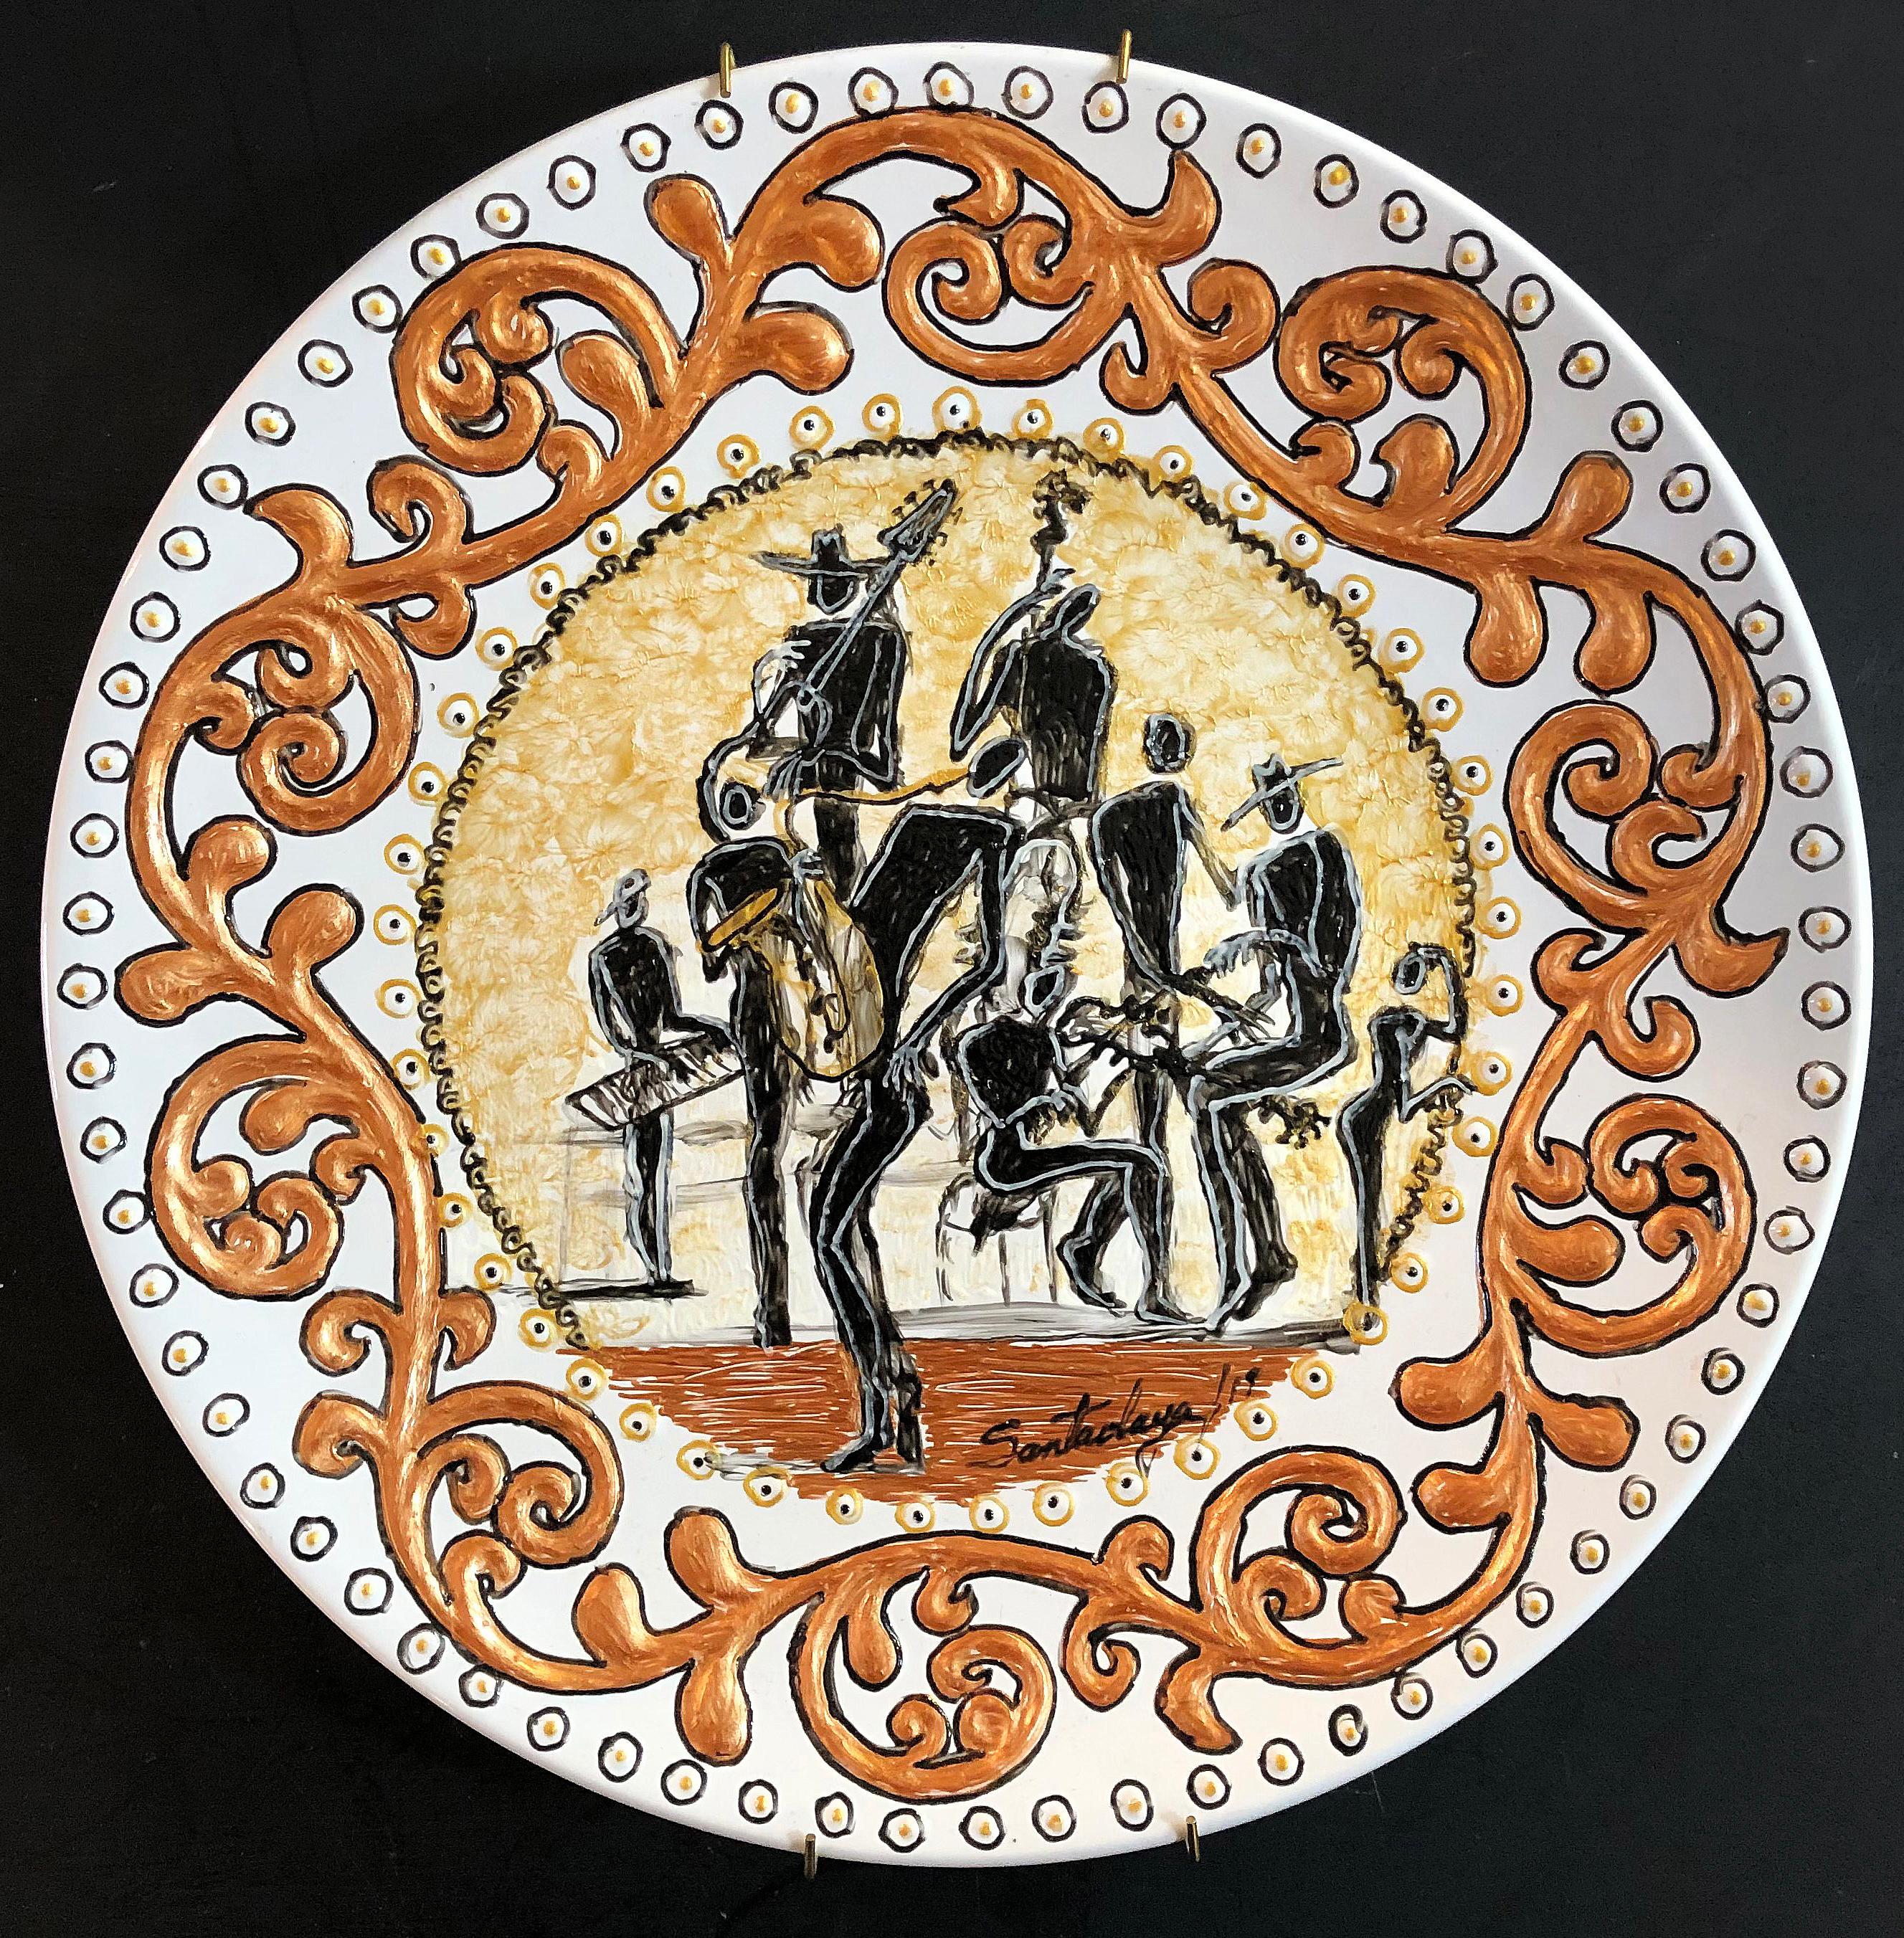 Hiremio Garcia Santaolaya ceramic wall charger, Cuban-American 

Offered is an original ceramic wall charger depicting a musical band by Cuban-American artist Hiremio Garcia Santaolaya, The charger is signed and dated 2019. It retains the original